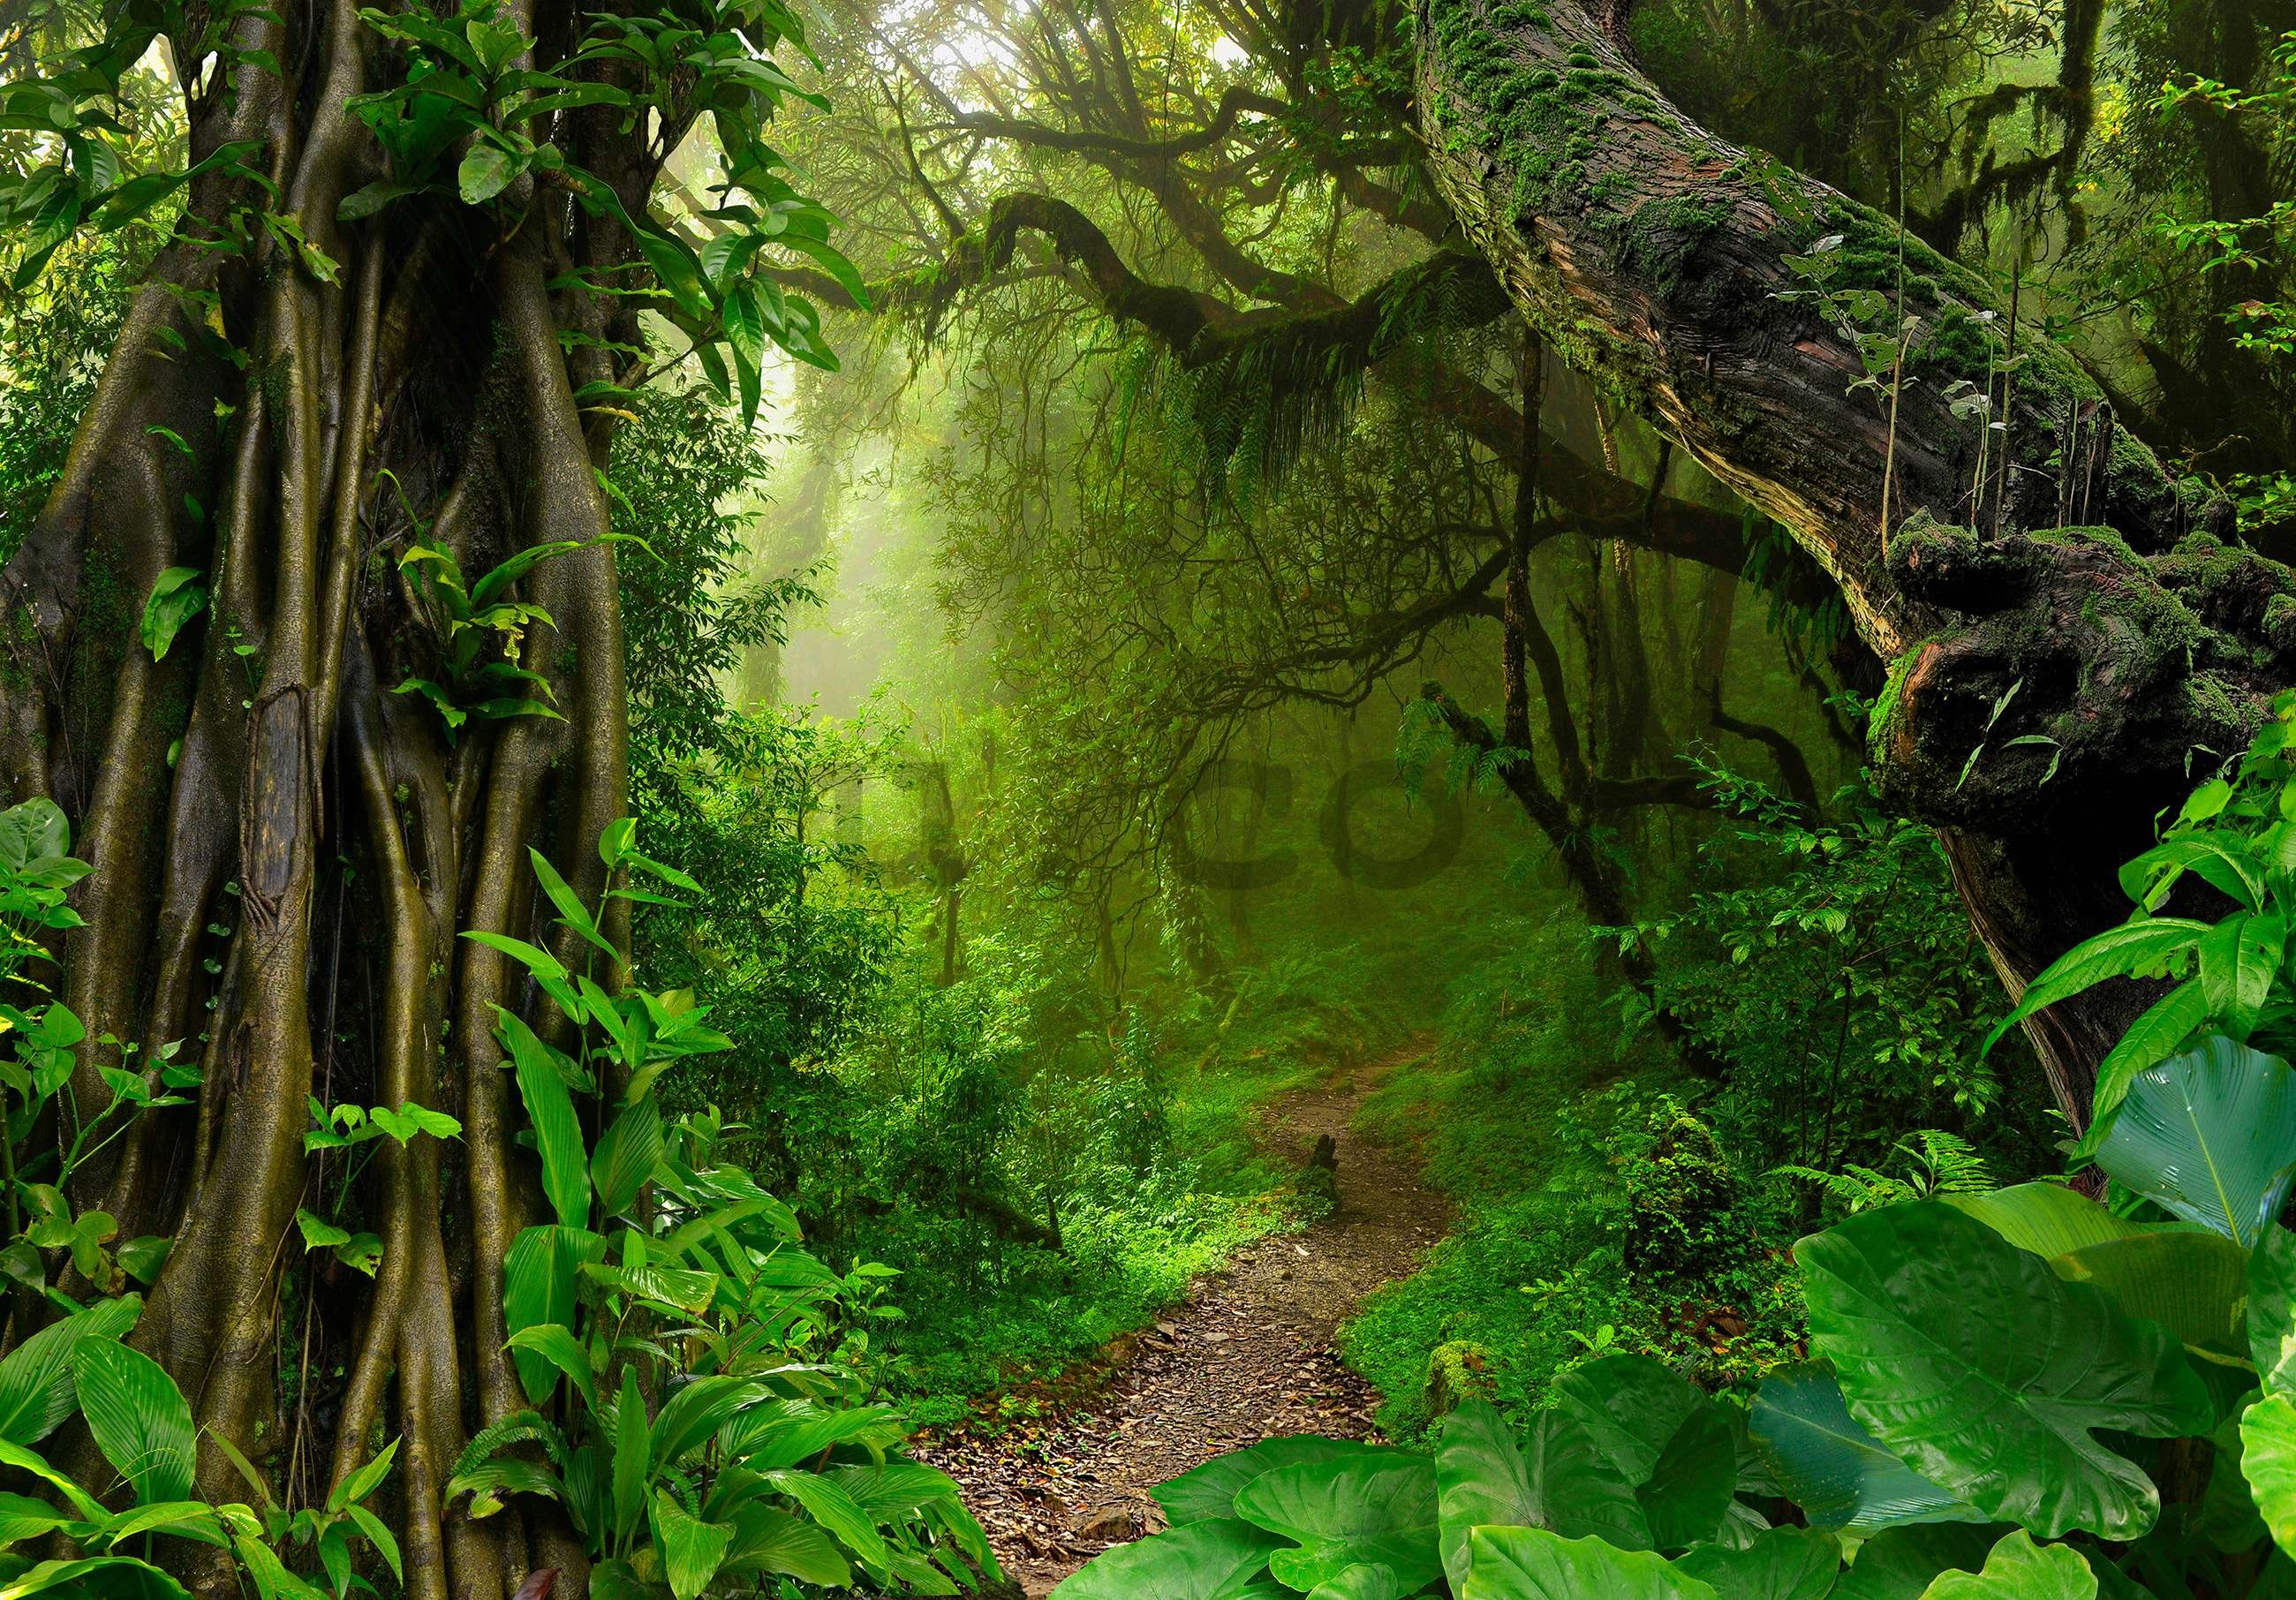 Wall mural vlies: Path in the forest - 254x184 cm